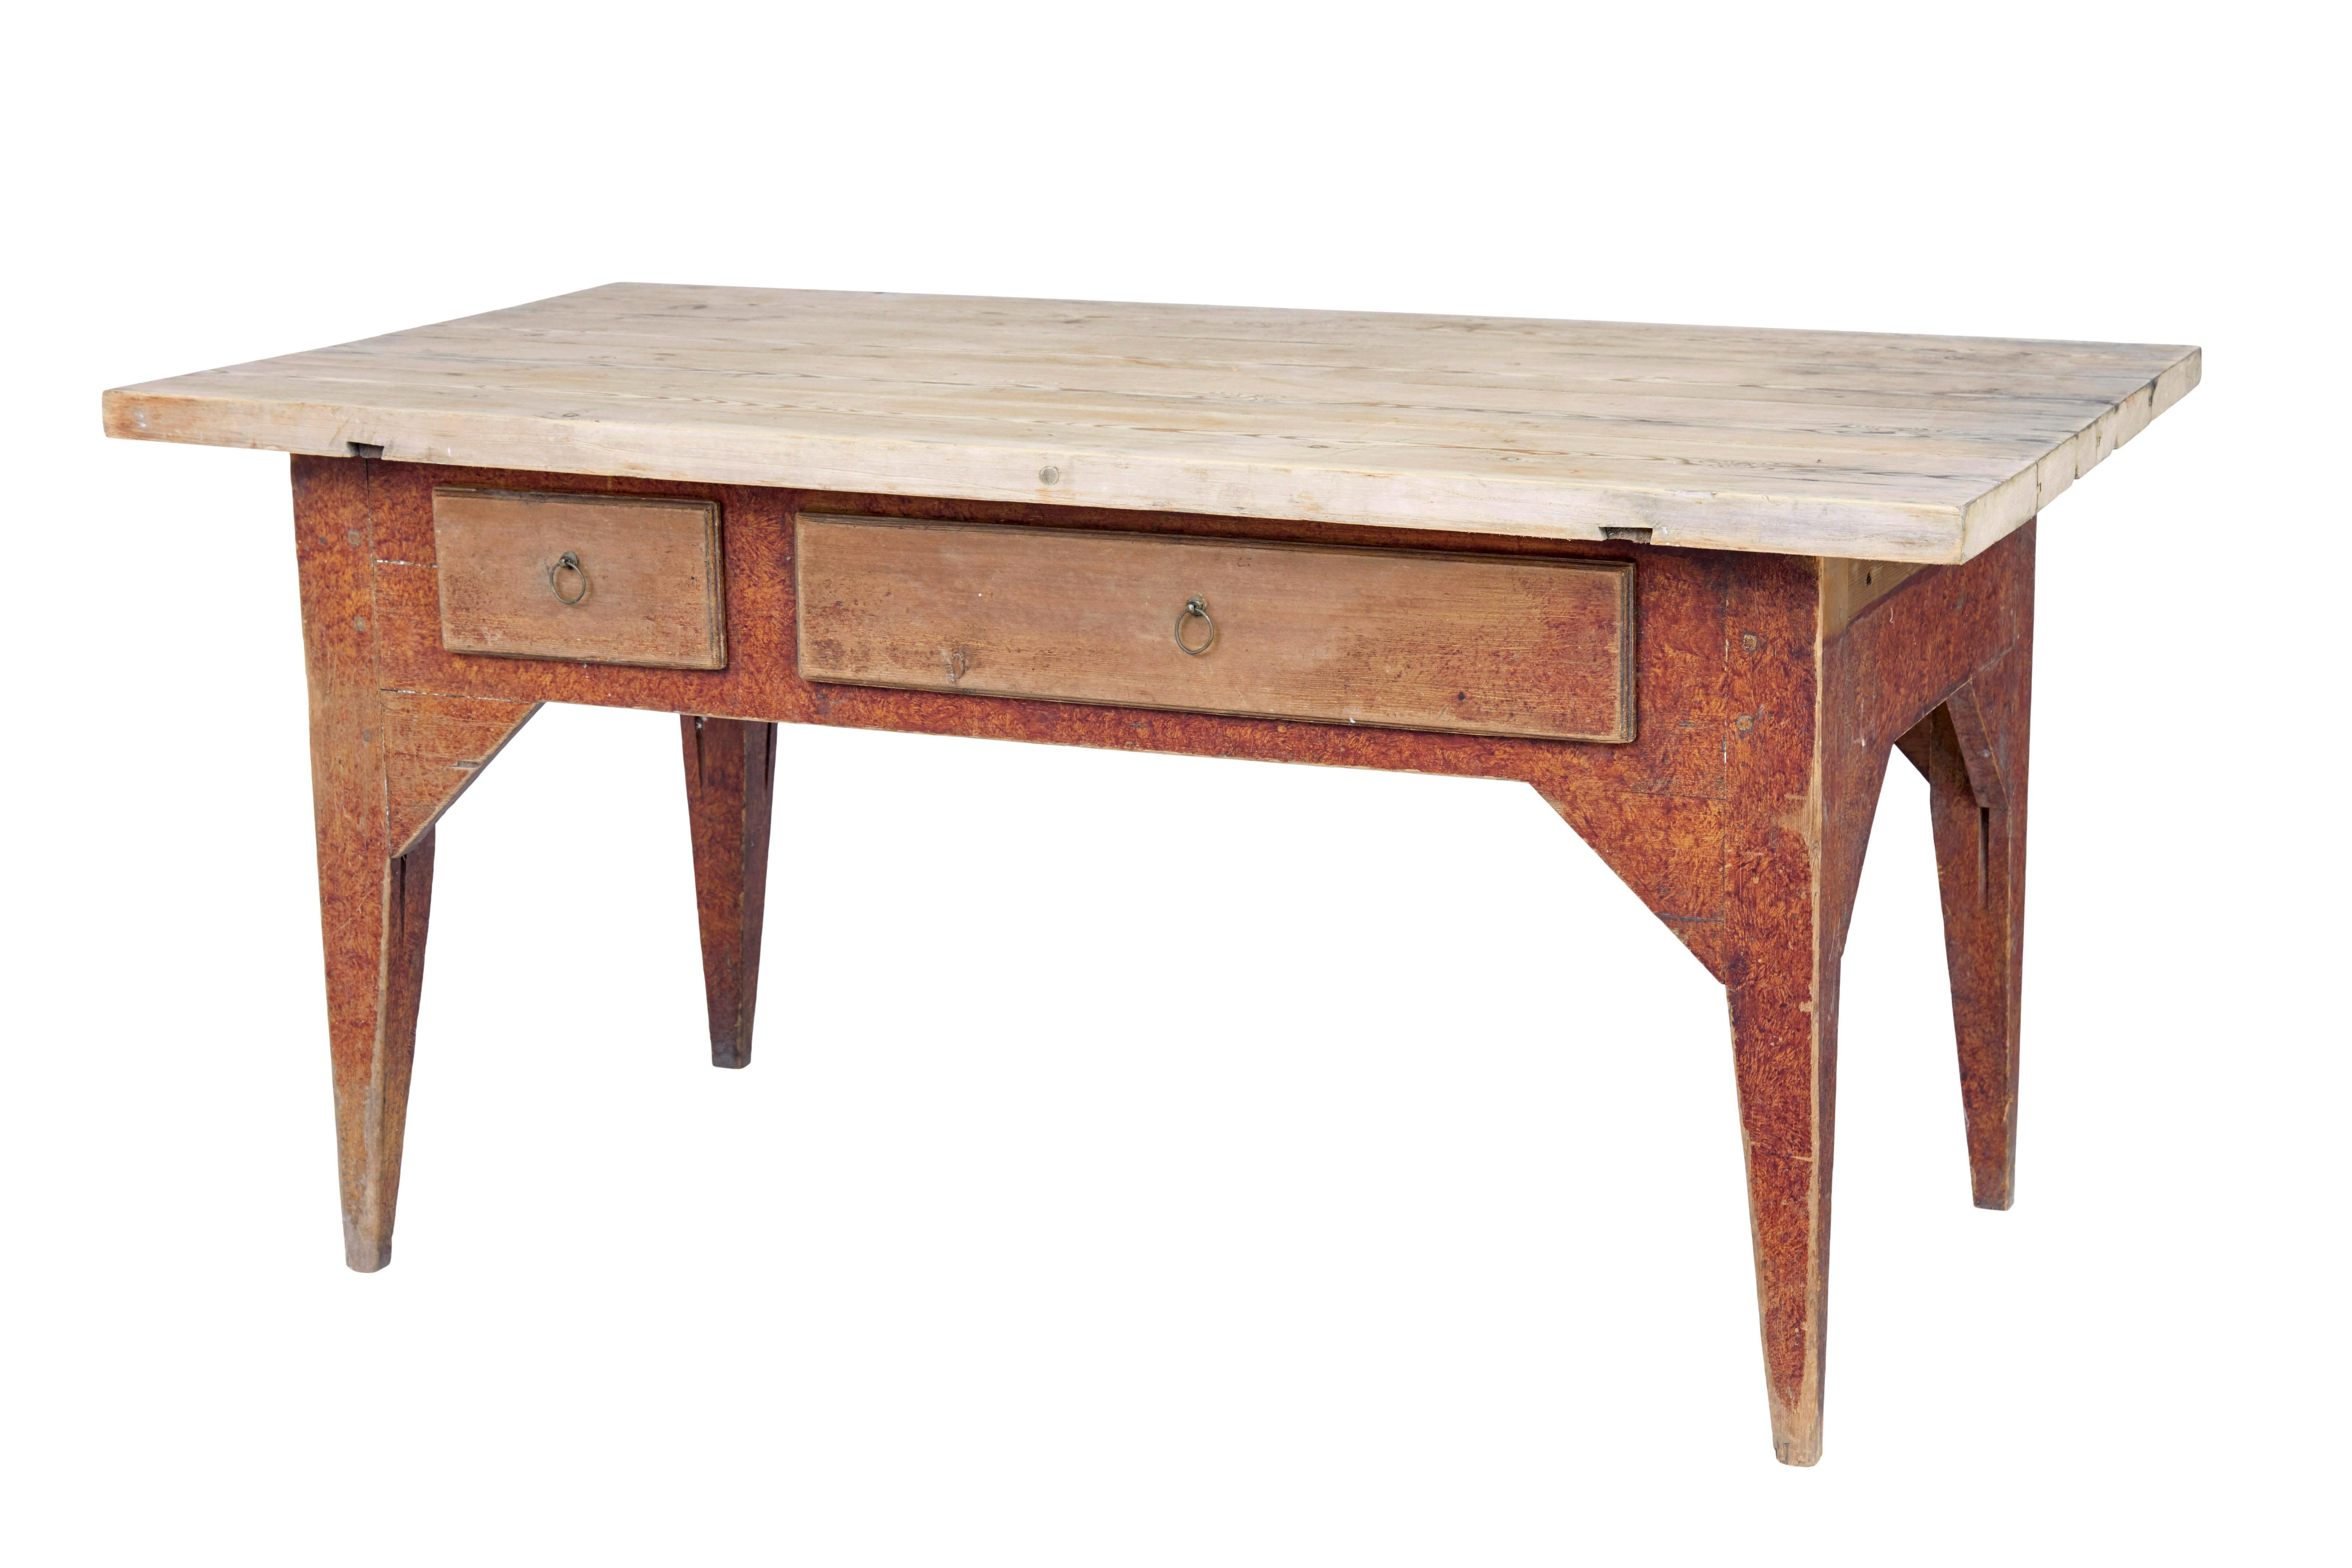 Mid 19th century rustic painted pine kitchen table circa 1850.

Good quality traditional swedish pine table with associated top.

Thick 4 plank top surface with expected surface marks and patina from use.  Standing on a rag work painted base made in